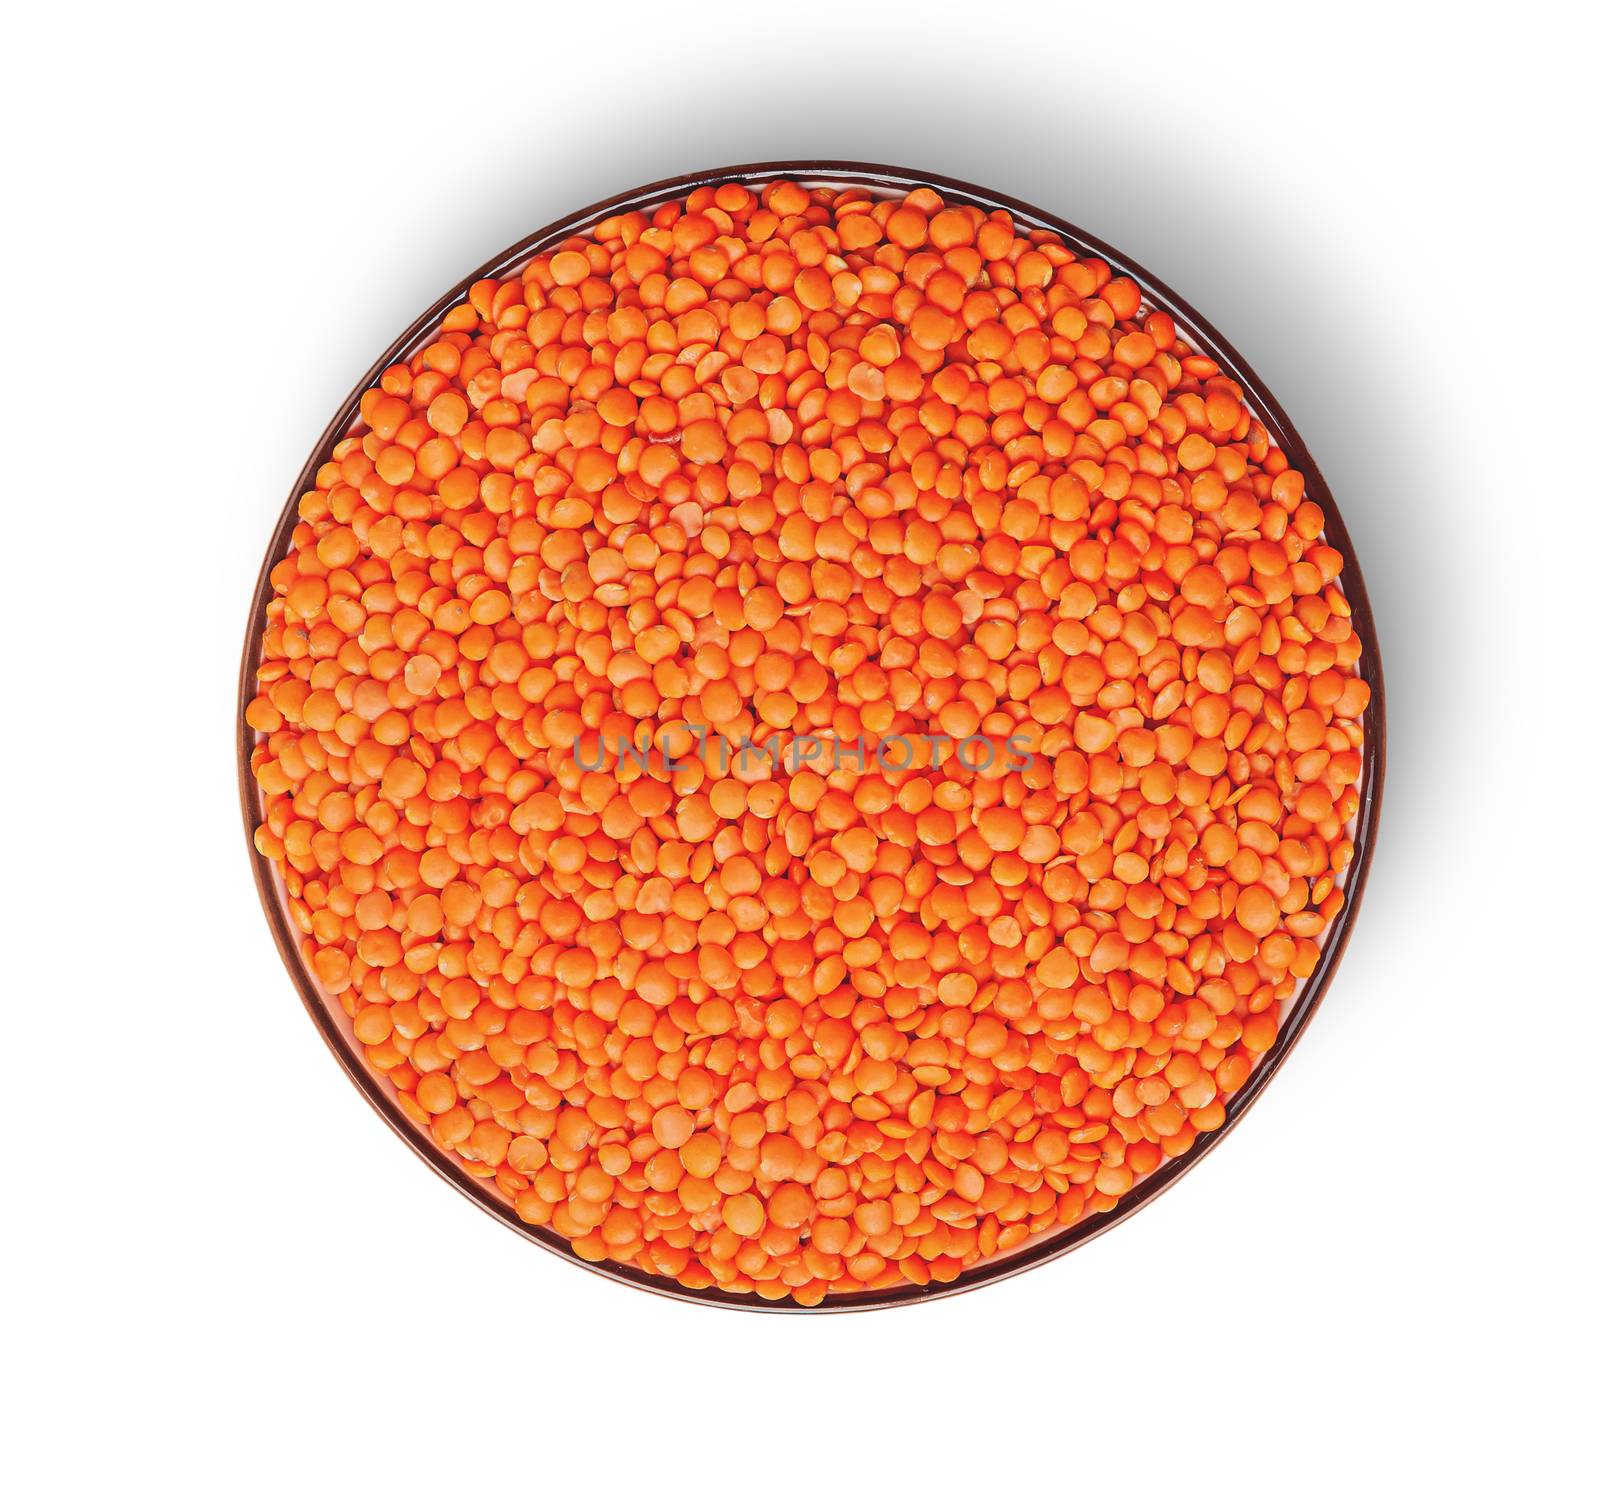 Orange lentils in bowl top view isolated on white background